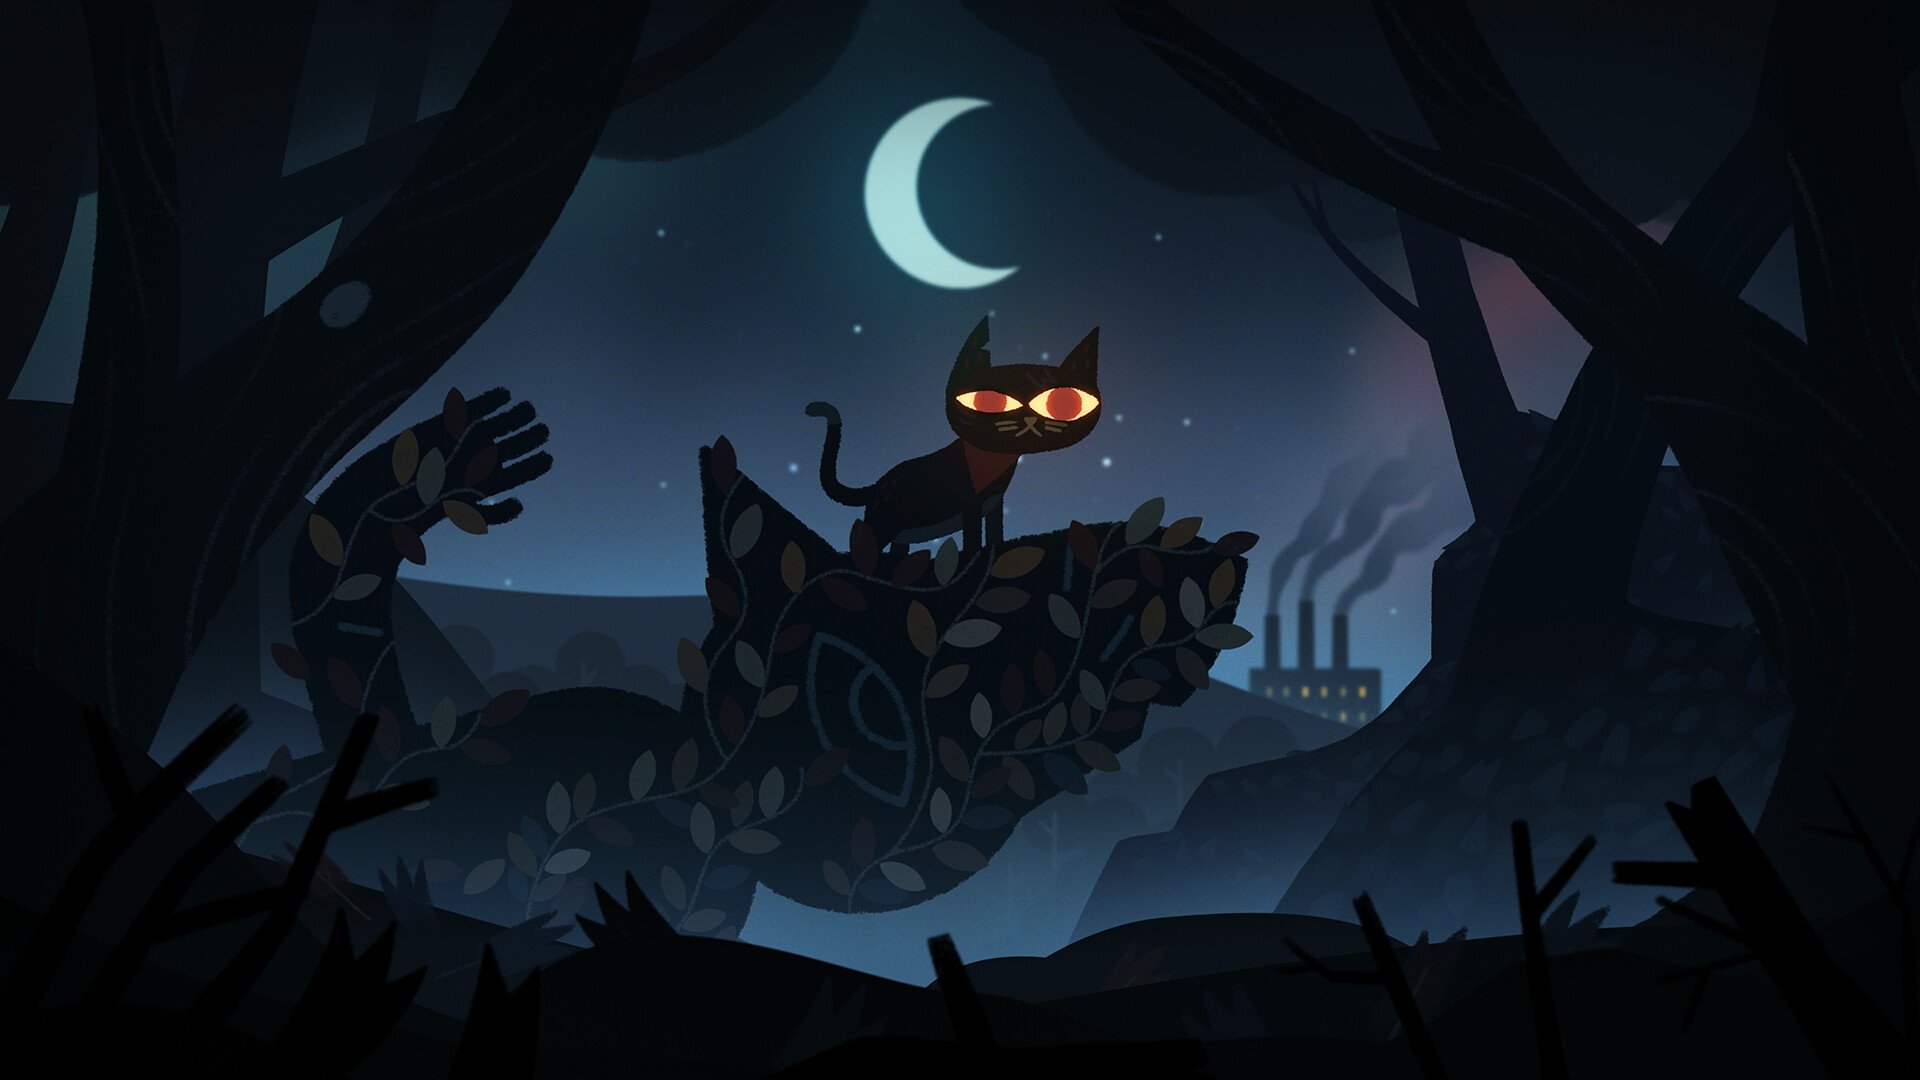 A black cat under a bright moonlight. The cat is standing on a structured covered in plants, which looks to resemble an animal, as the cat looks out at the view of a factory in the distance with smoke bellowing from the chimneys